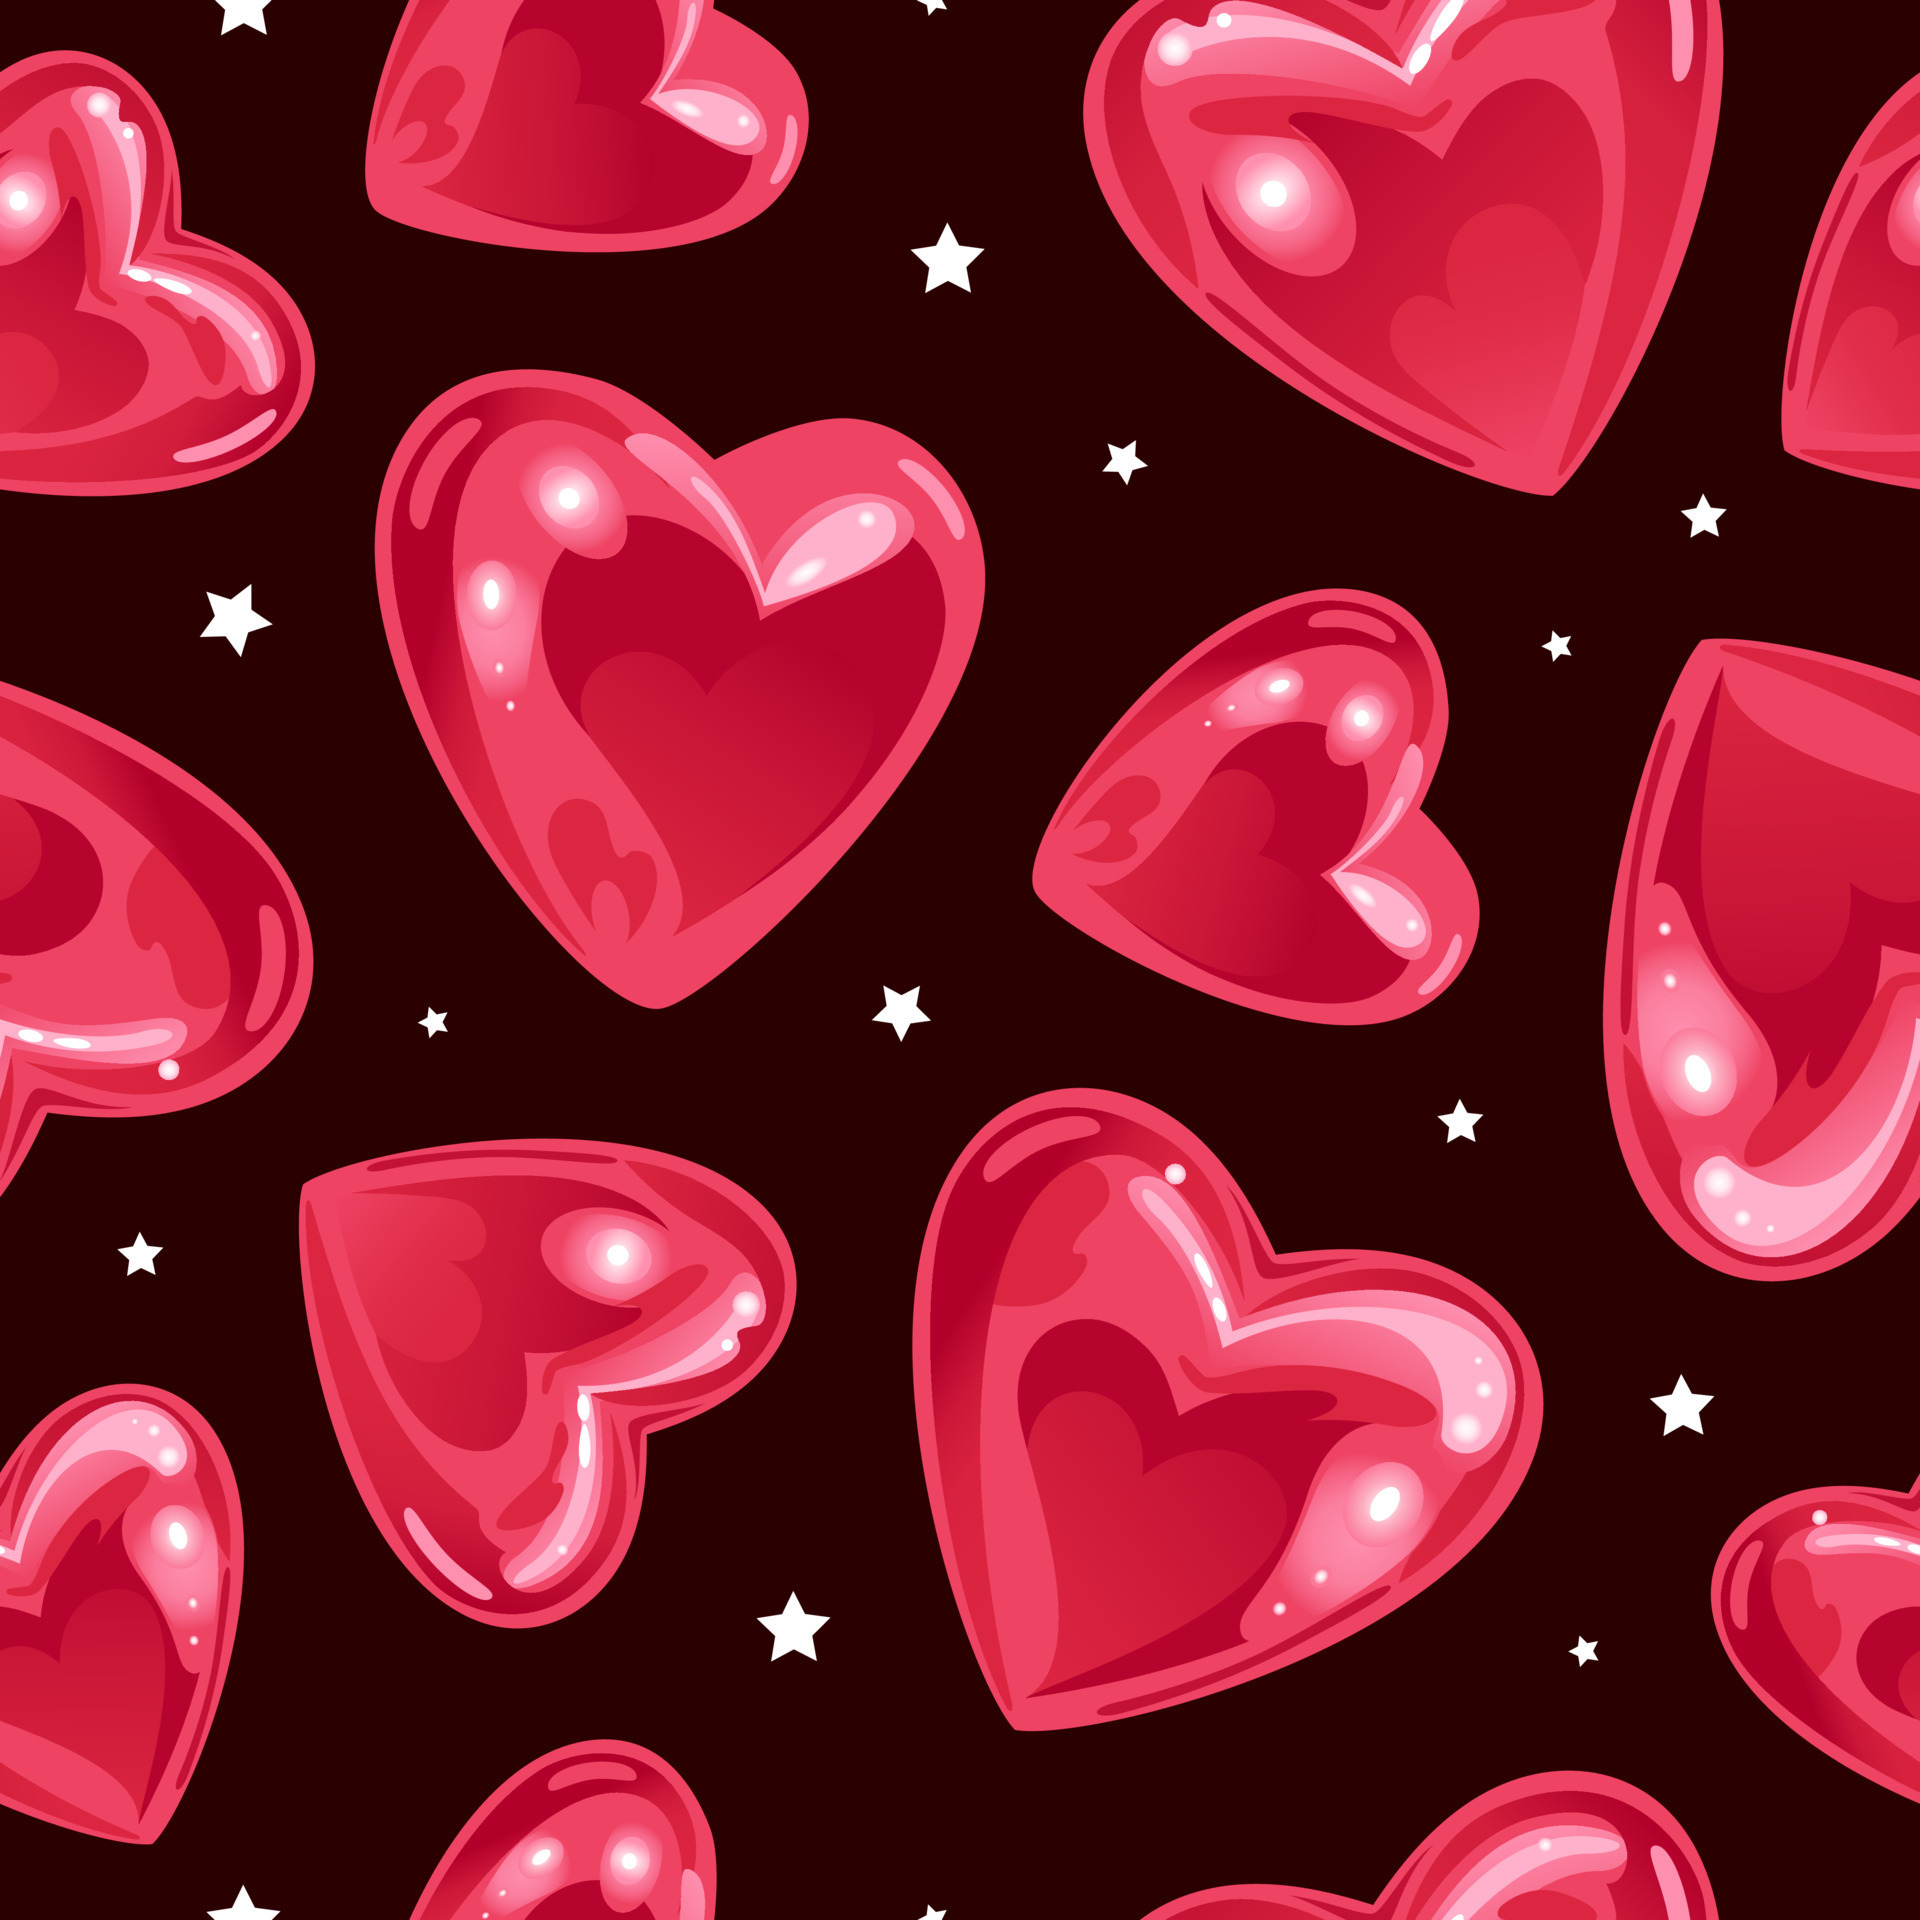 Animated Love Heart Wallpaper for Mobile  Mobile Wallpapers  Download  Free Android iPhone Samsung HD Backgrounds